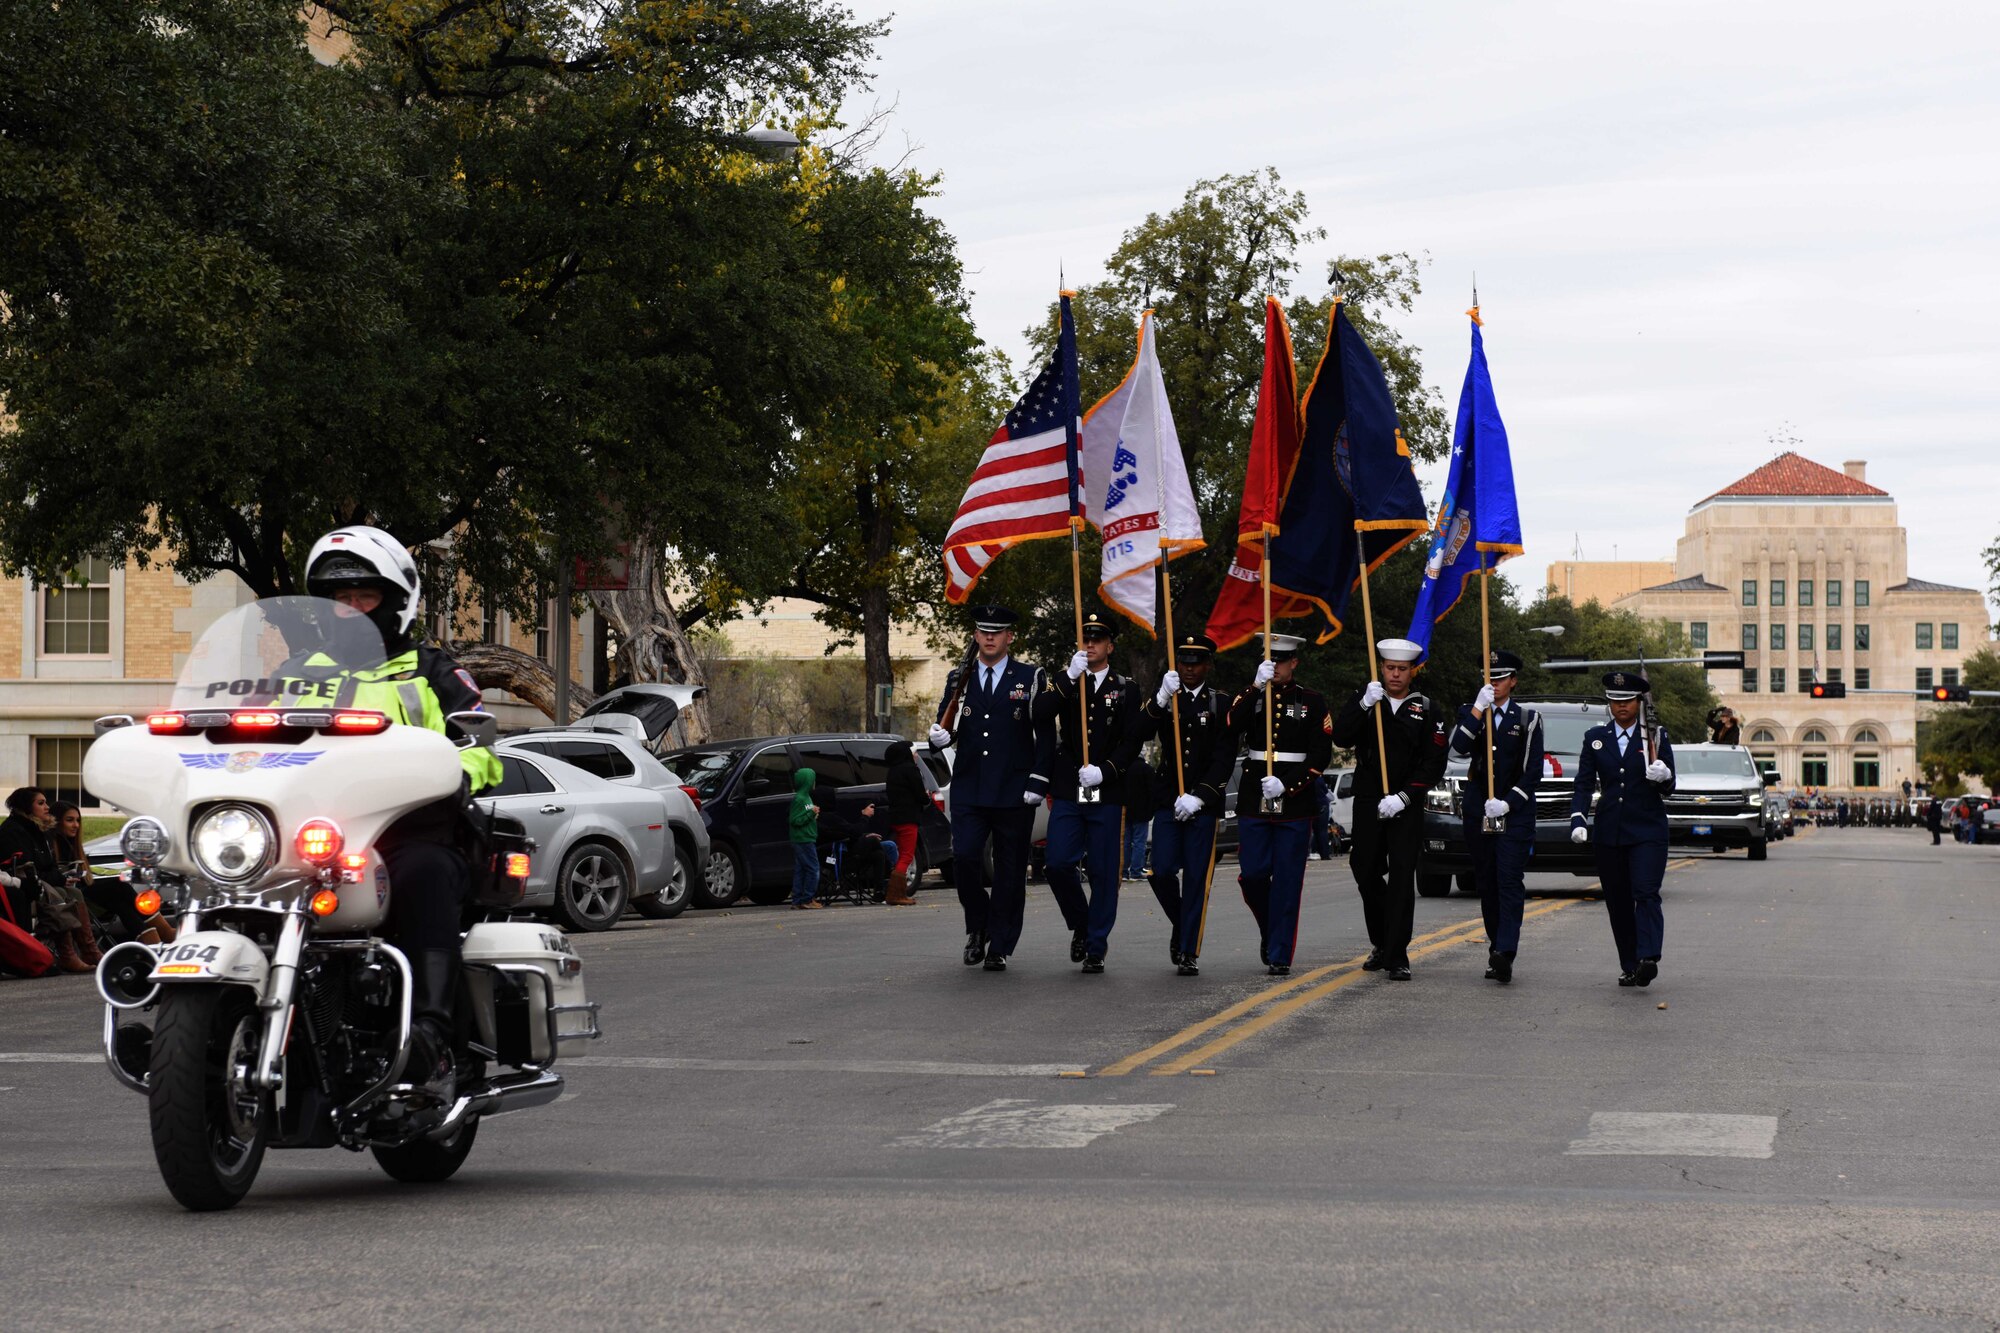 Joint Base Color Guard marches in the Veterans Day Parade in San Angelo, Texas, Nov. 10, 2018. The Color Guard led the parade through the streets of downtown San Angelo. (U.S. Air Force photo by Senior Airman Randall Moose/Released)